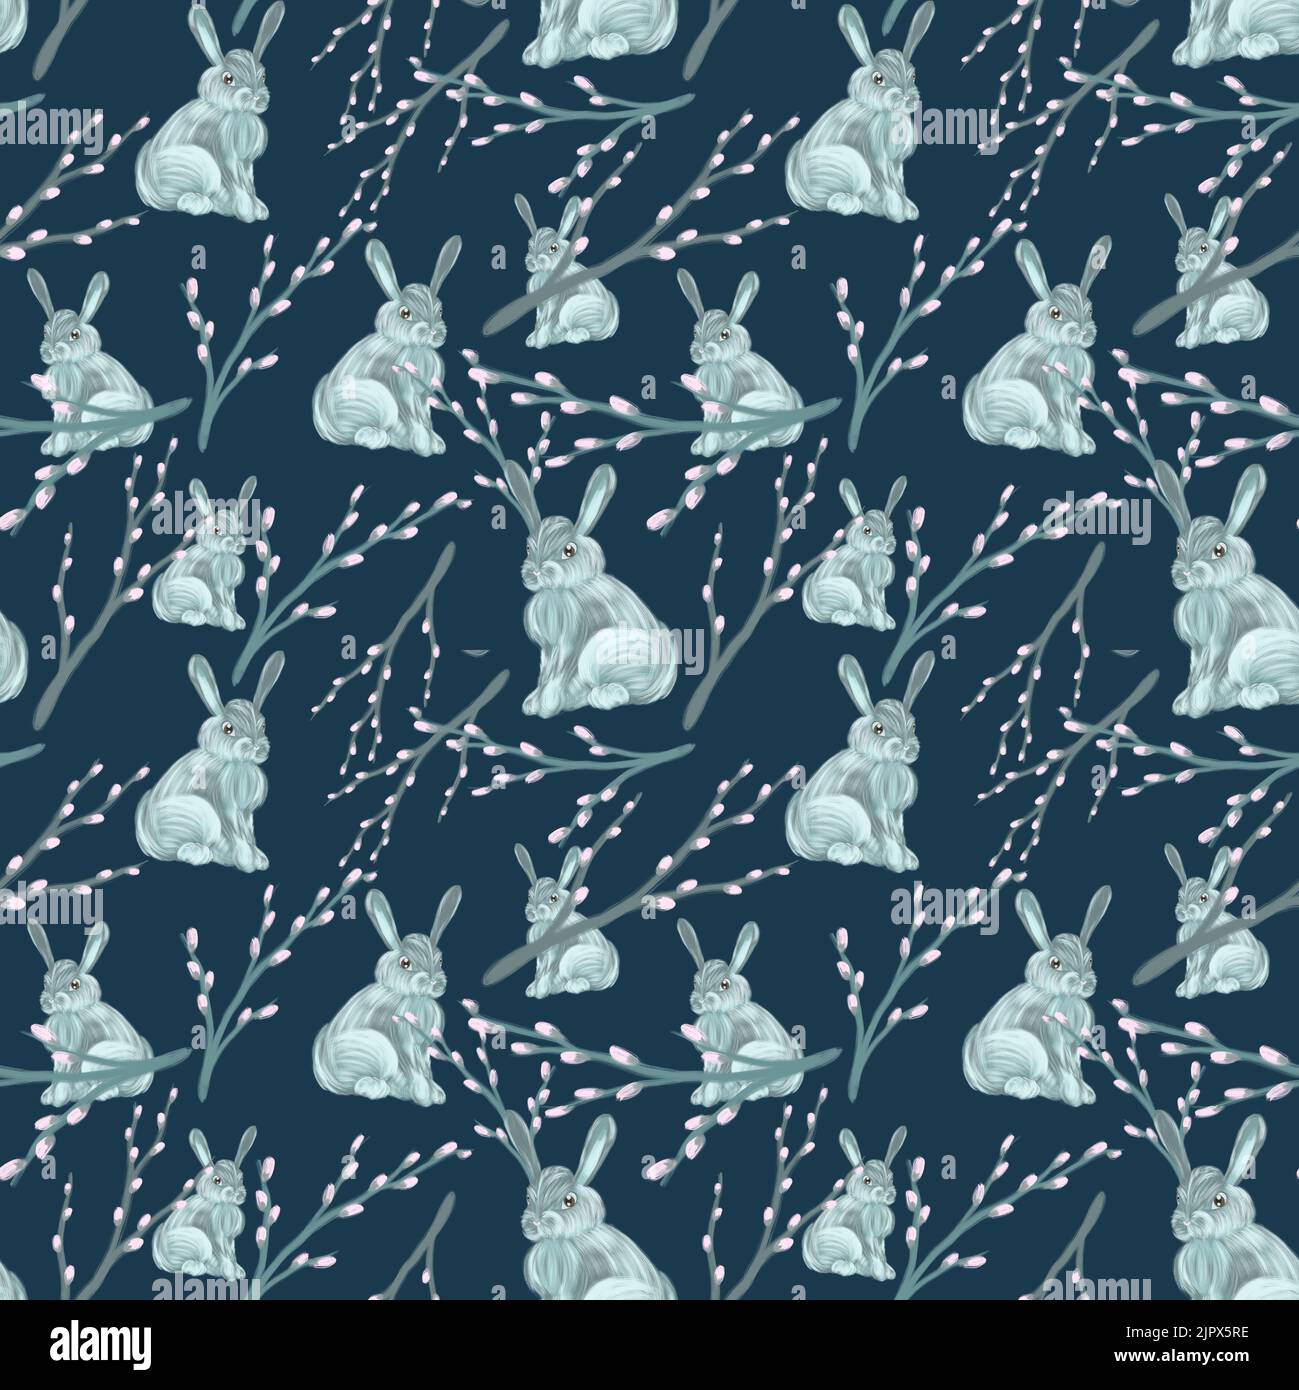 Seamless pattern rabbits and willow painted in watercolor in a realistic style on a dark background. Stock Photo